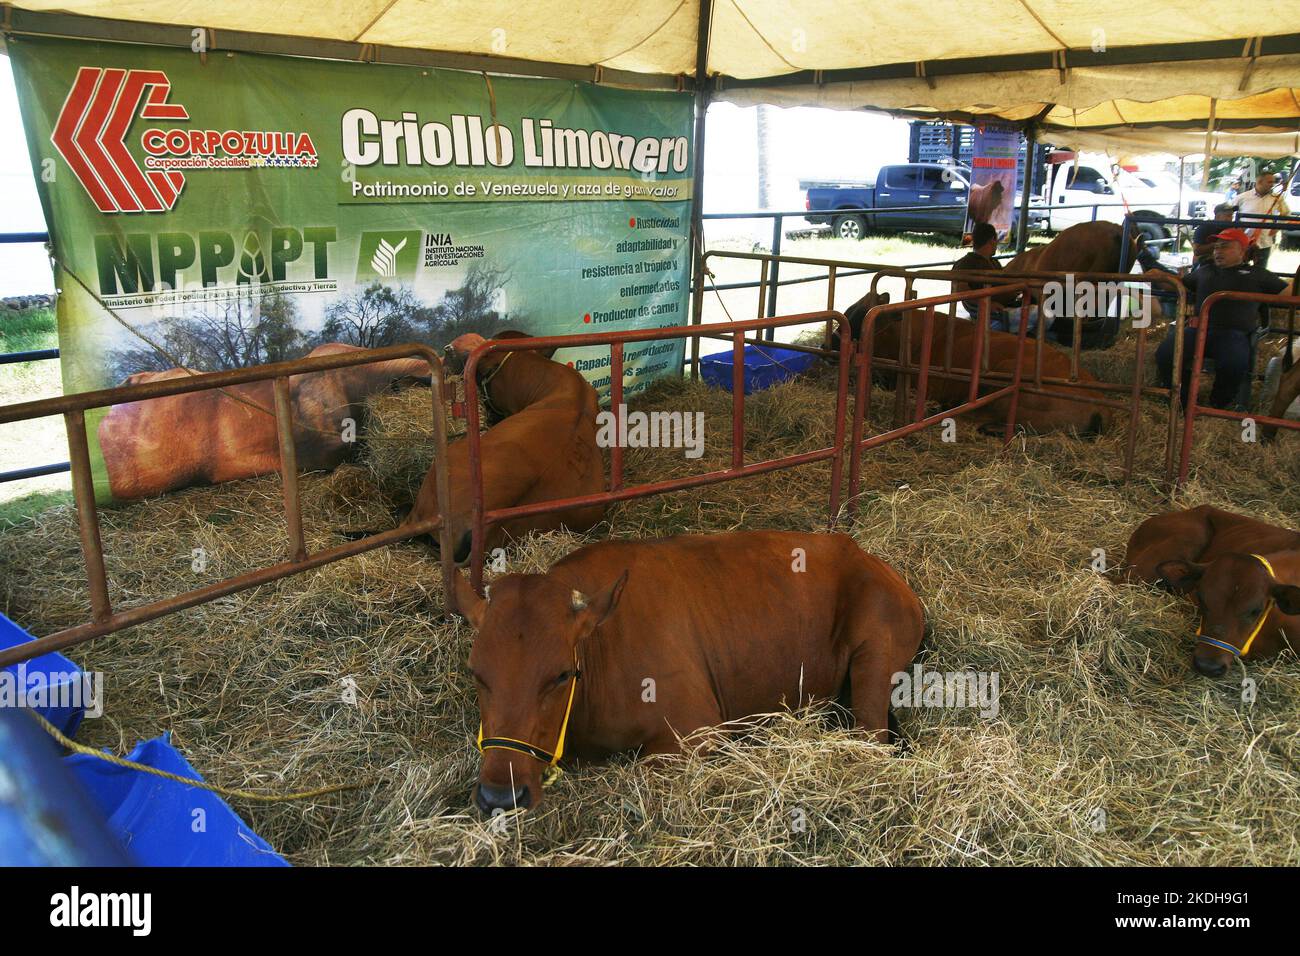 With the participation of more than 70 companies from the livestock, sheep, goat, agricultural, commercial, hardware and automotive sectors, they met at the facilities of the Hotel Tibisay del Lago, this Sunday, November 6, 2022 in the city of Maracaibo, Venezuela. The National Federation of Livestock Farmers (Fedenaga) and the Federation of Livestock Farmers of the Maracaibo Lake Basin (Fegalago) organized this Expo Livestock Congress. The productive potentialities to be developed in the private livestock sector hope to get ahead of the crisis and overcome the current obstacles and challenges Stock Photo